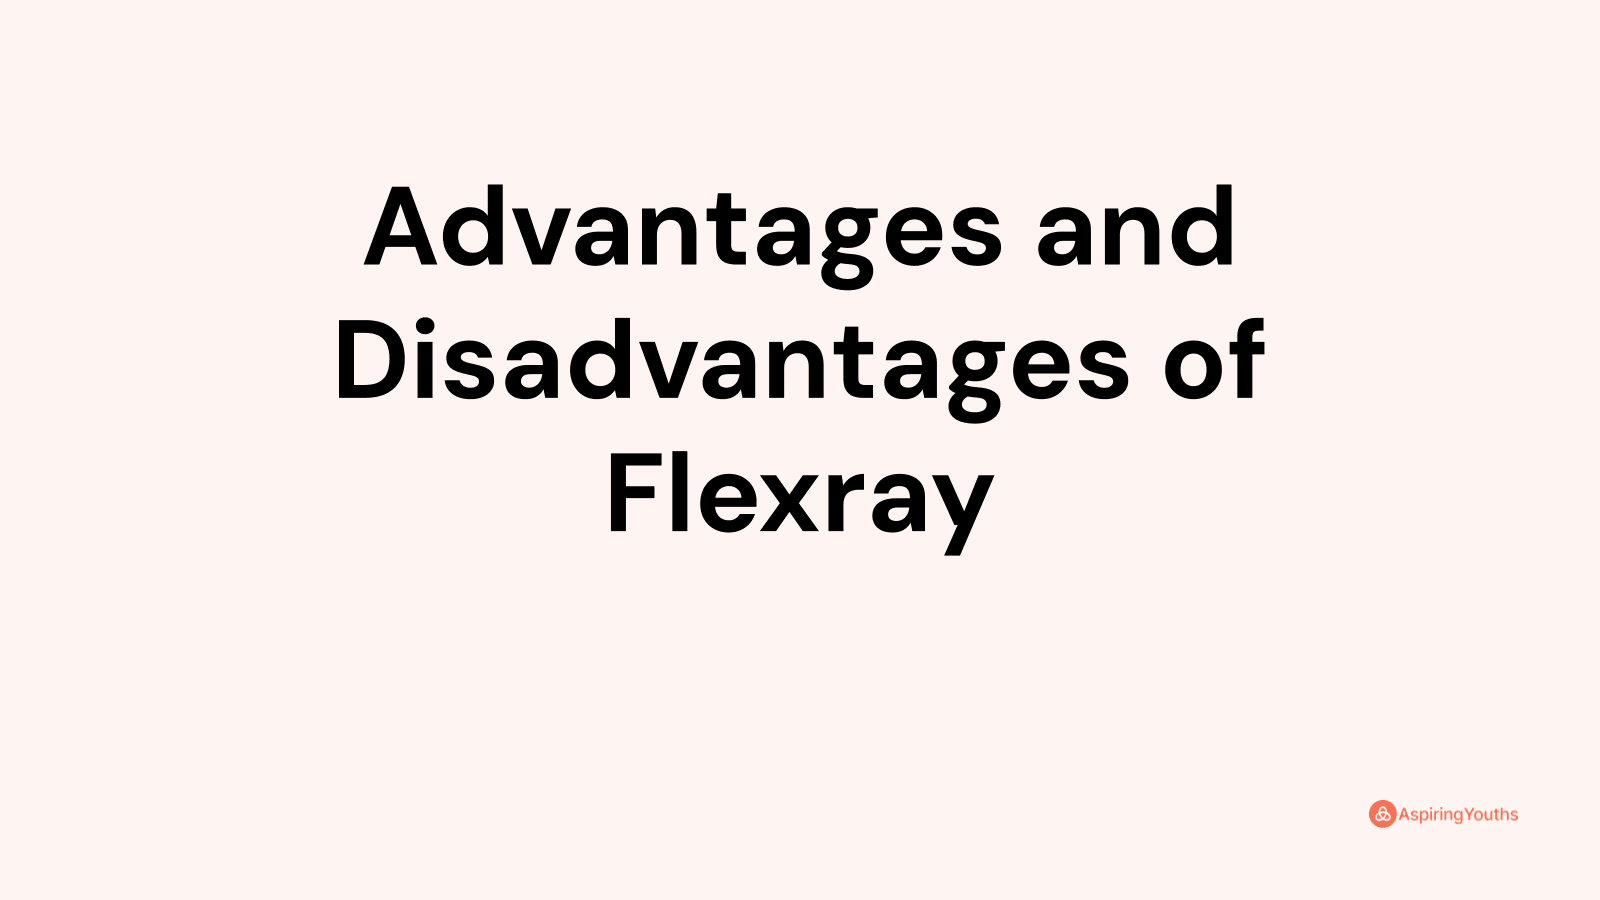 Advantages and disadvantages of Flexray